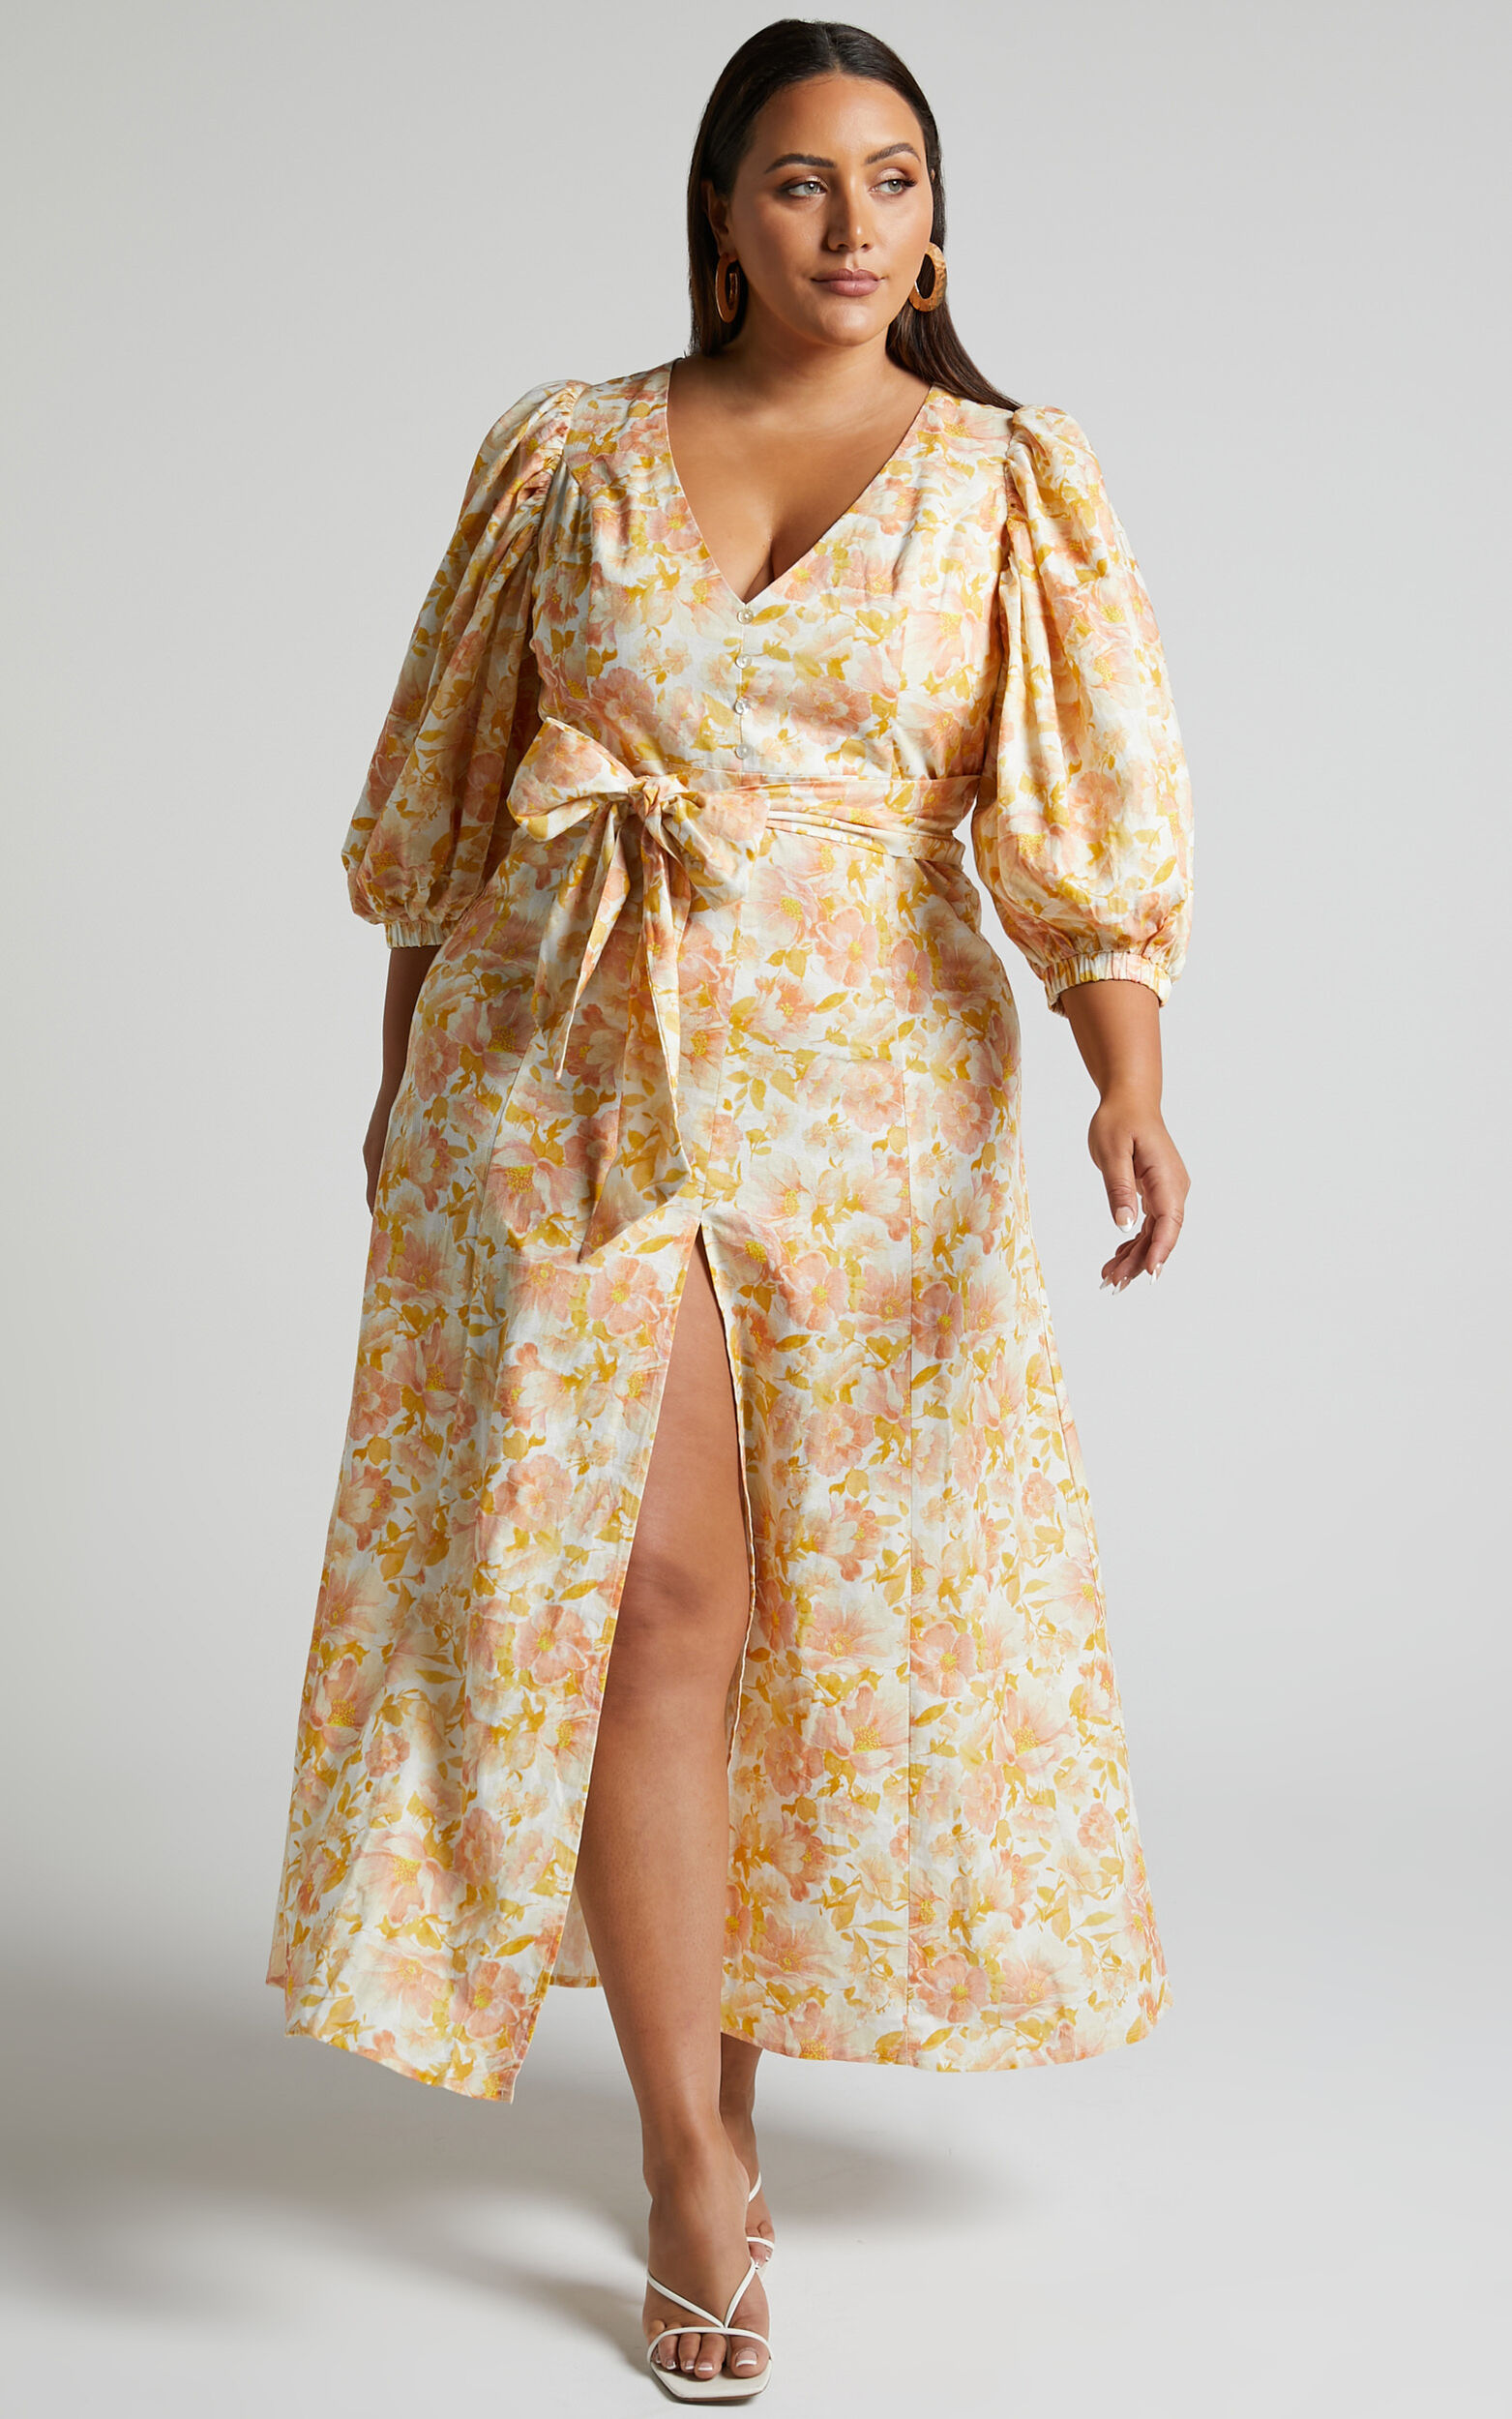 Amalie The Label - Lytina Puff Sleeve Open Back Midaxi Dress in Sierra Floral - 06, PNK1